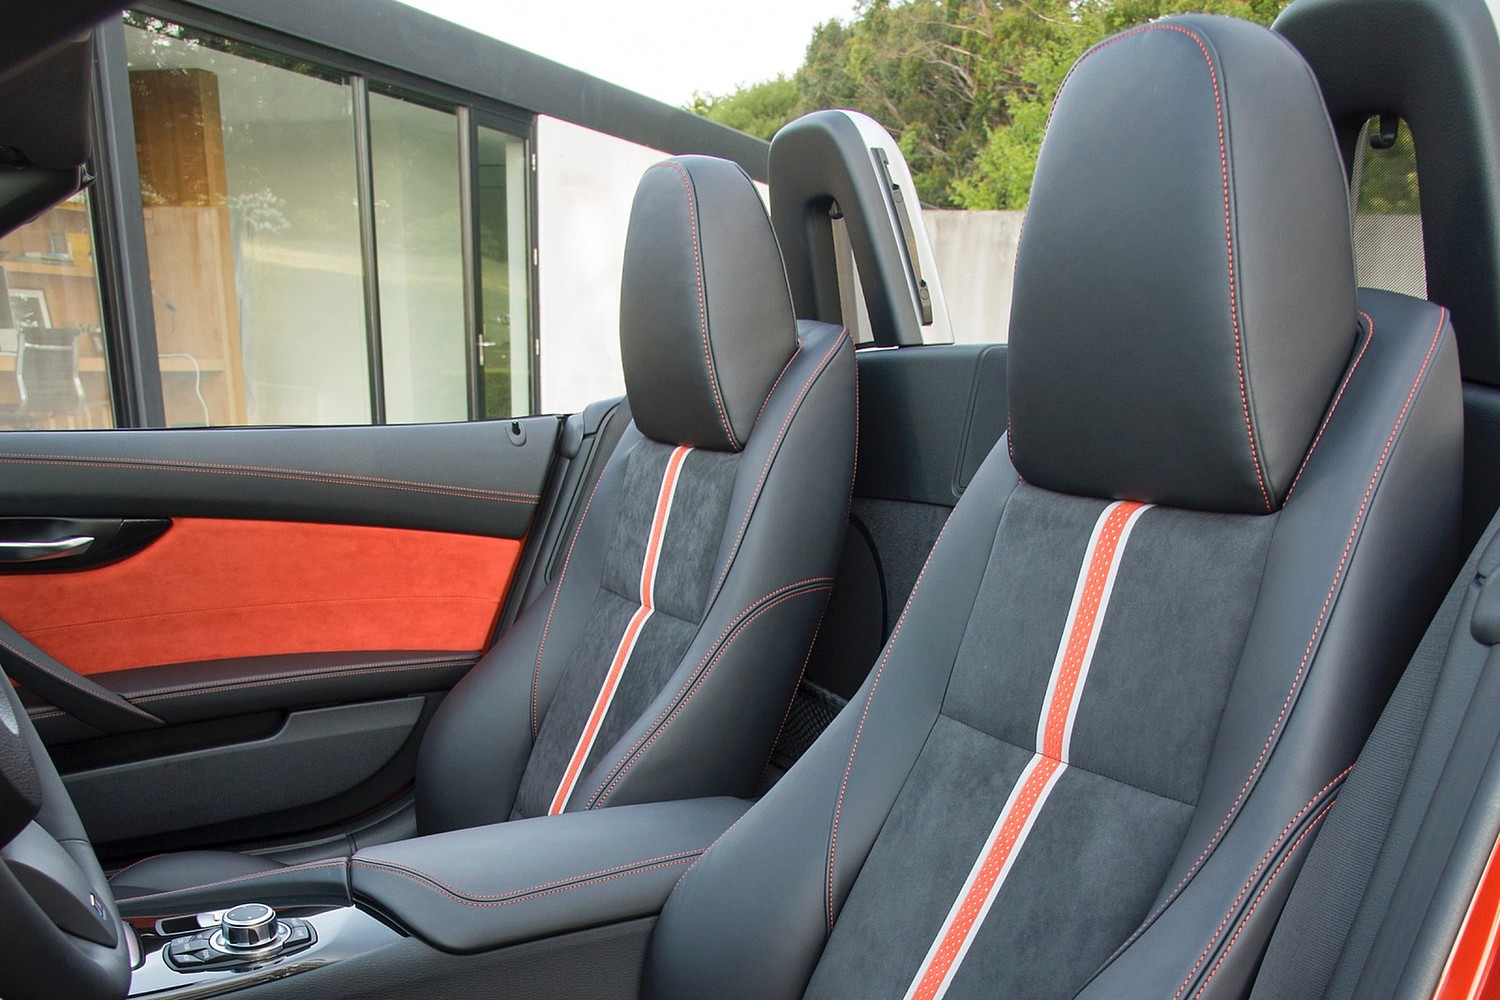 BMW Z4 sDrive35is Convertible Interior (2015 model year shown)